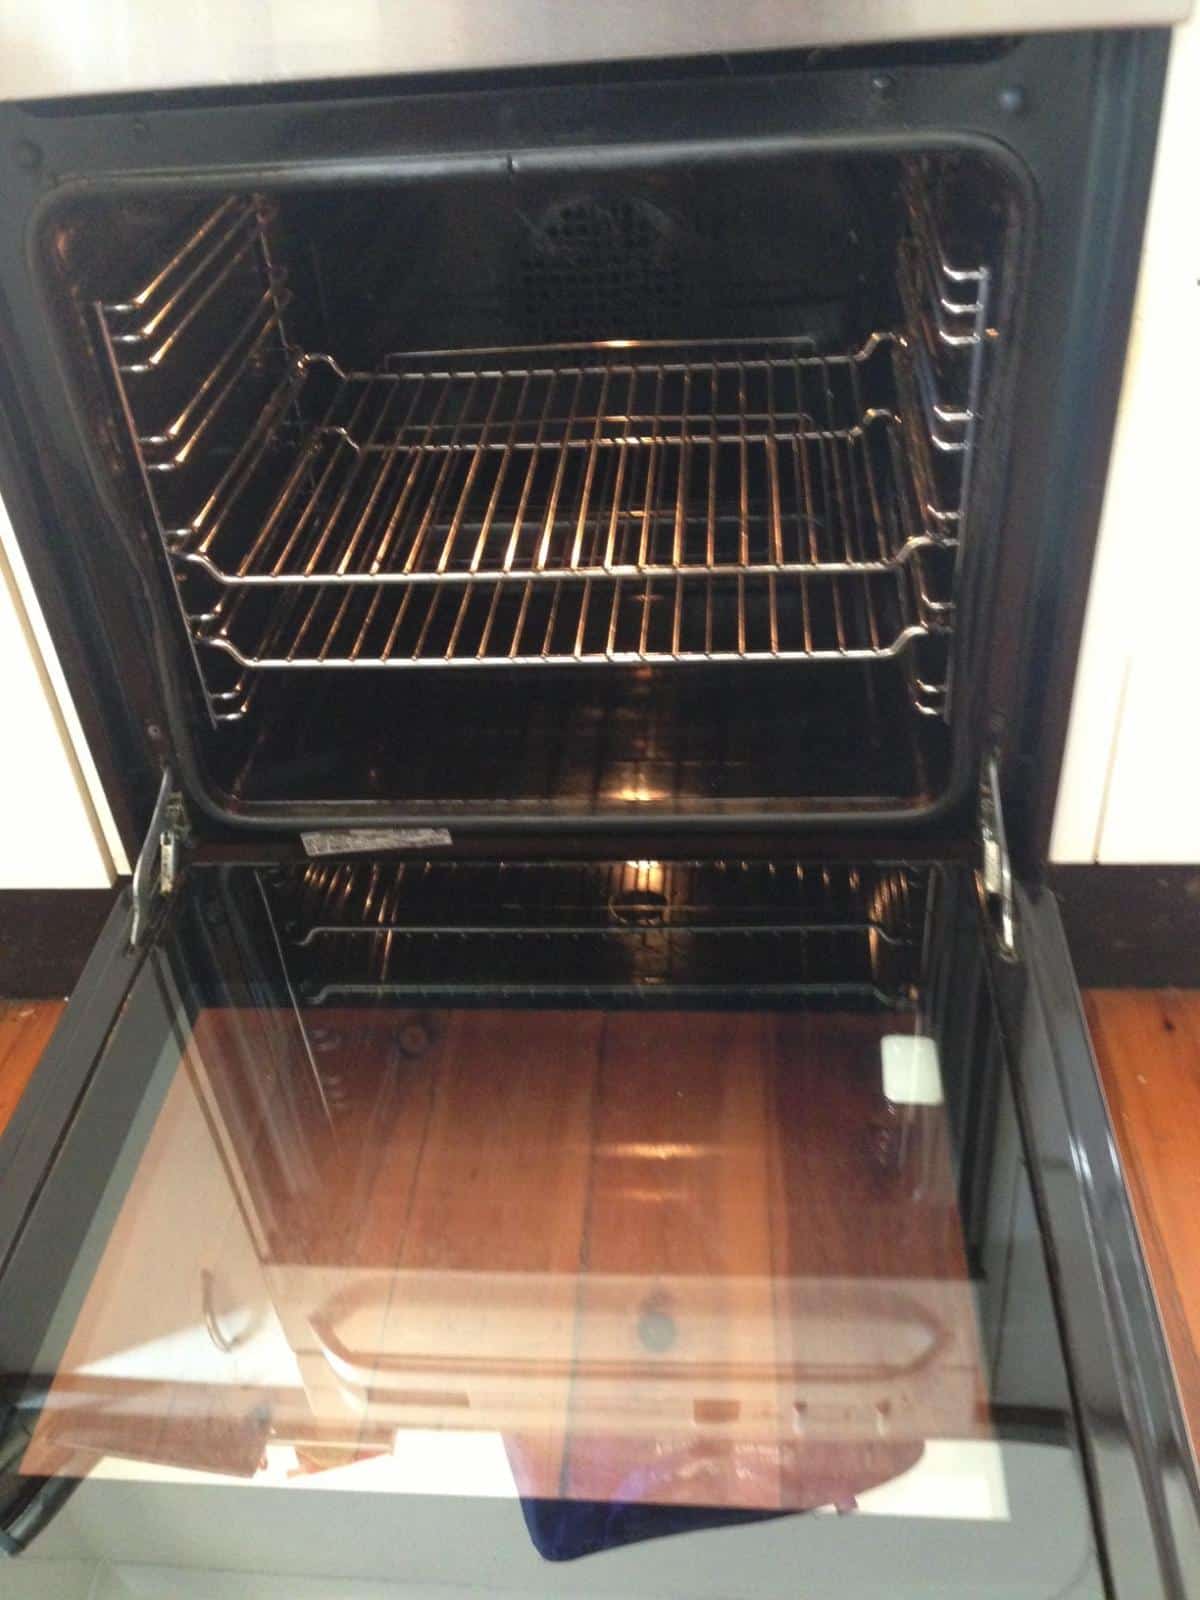 An oven after cleaning.